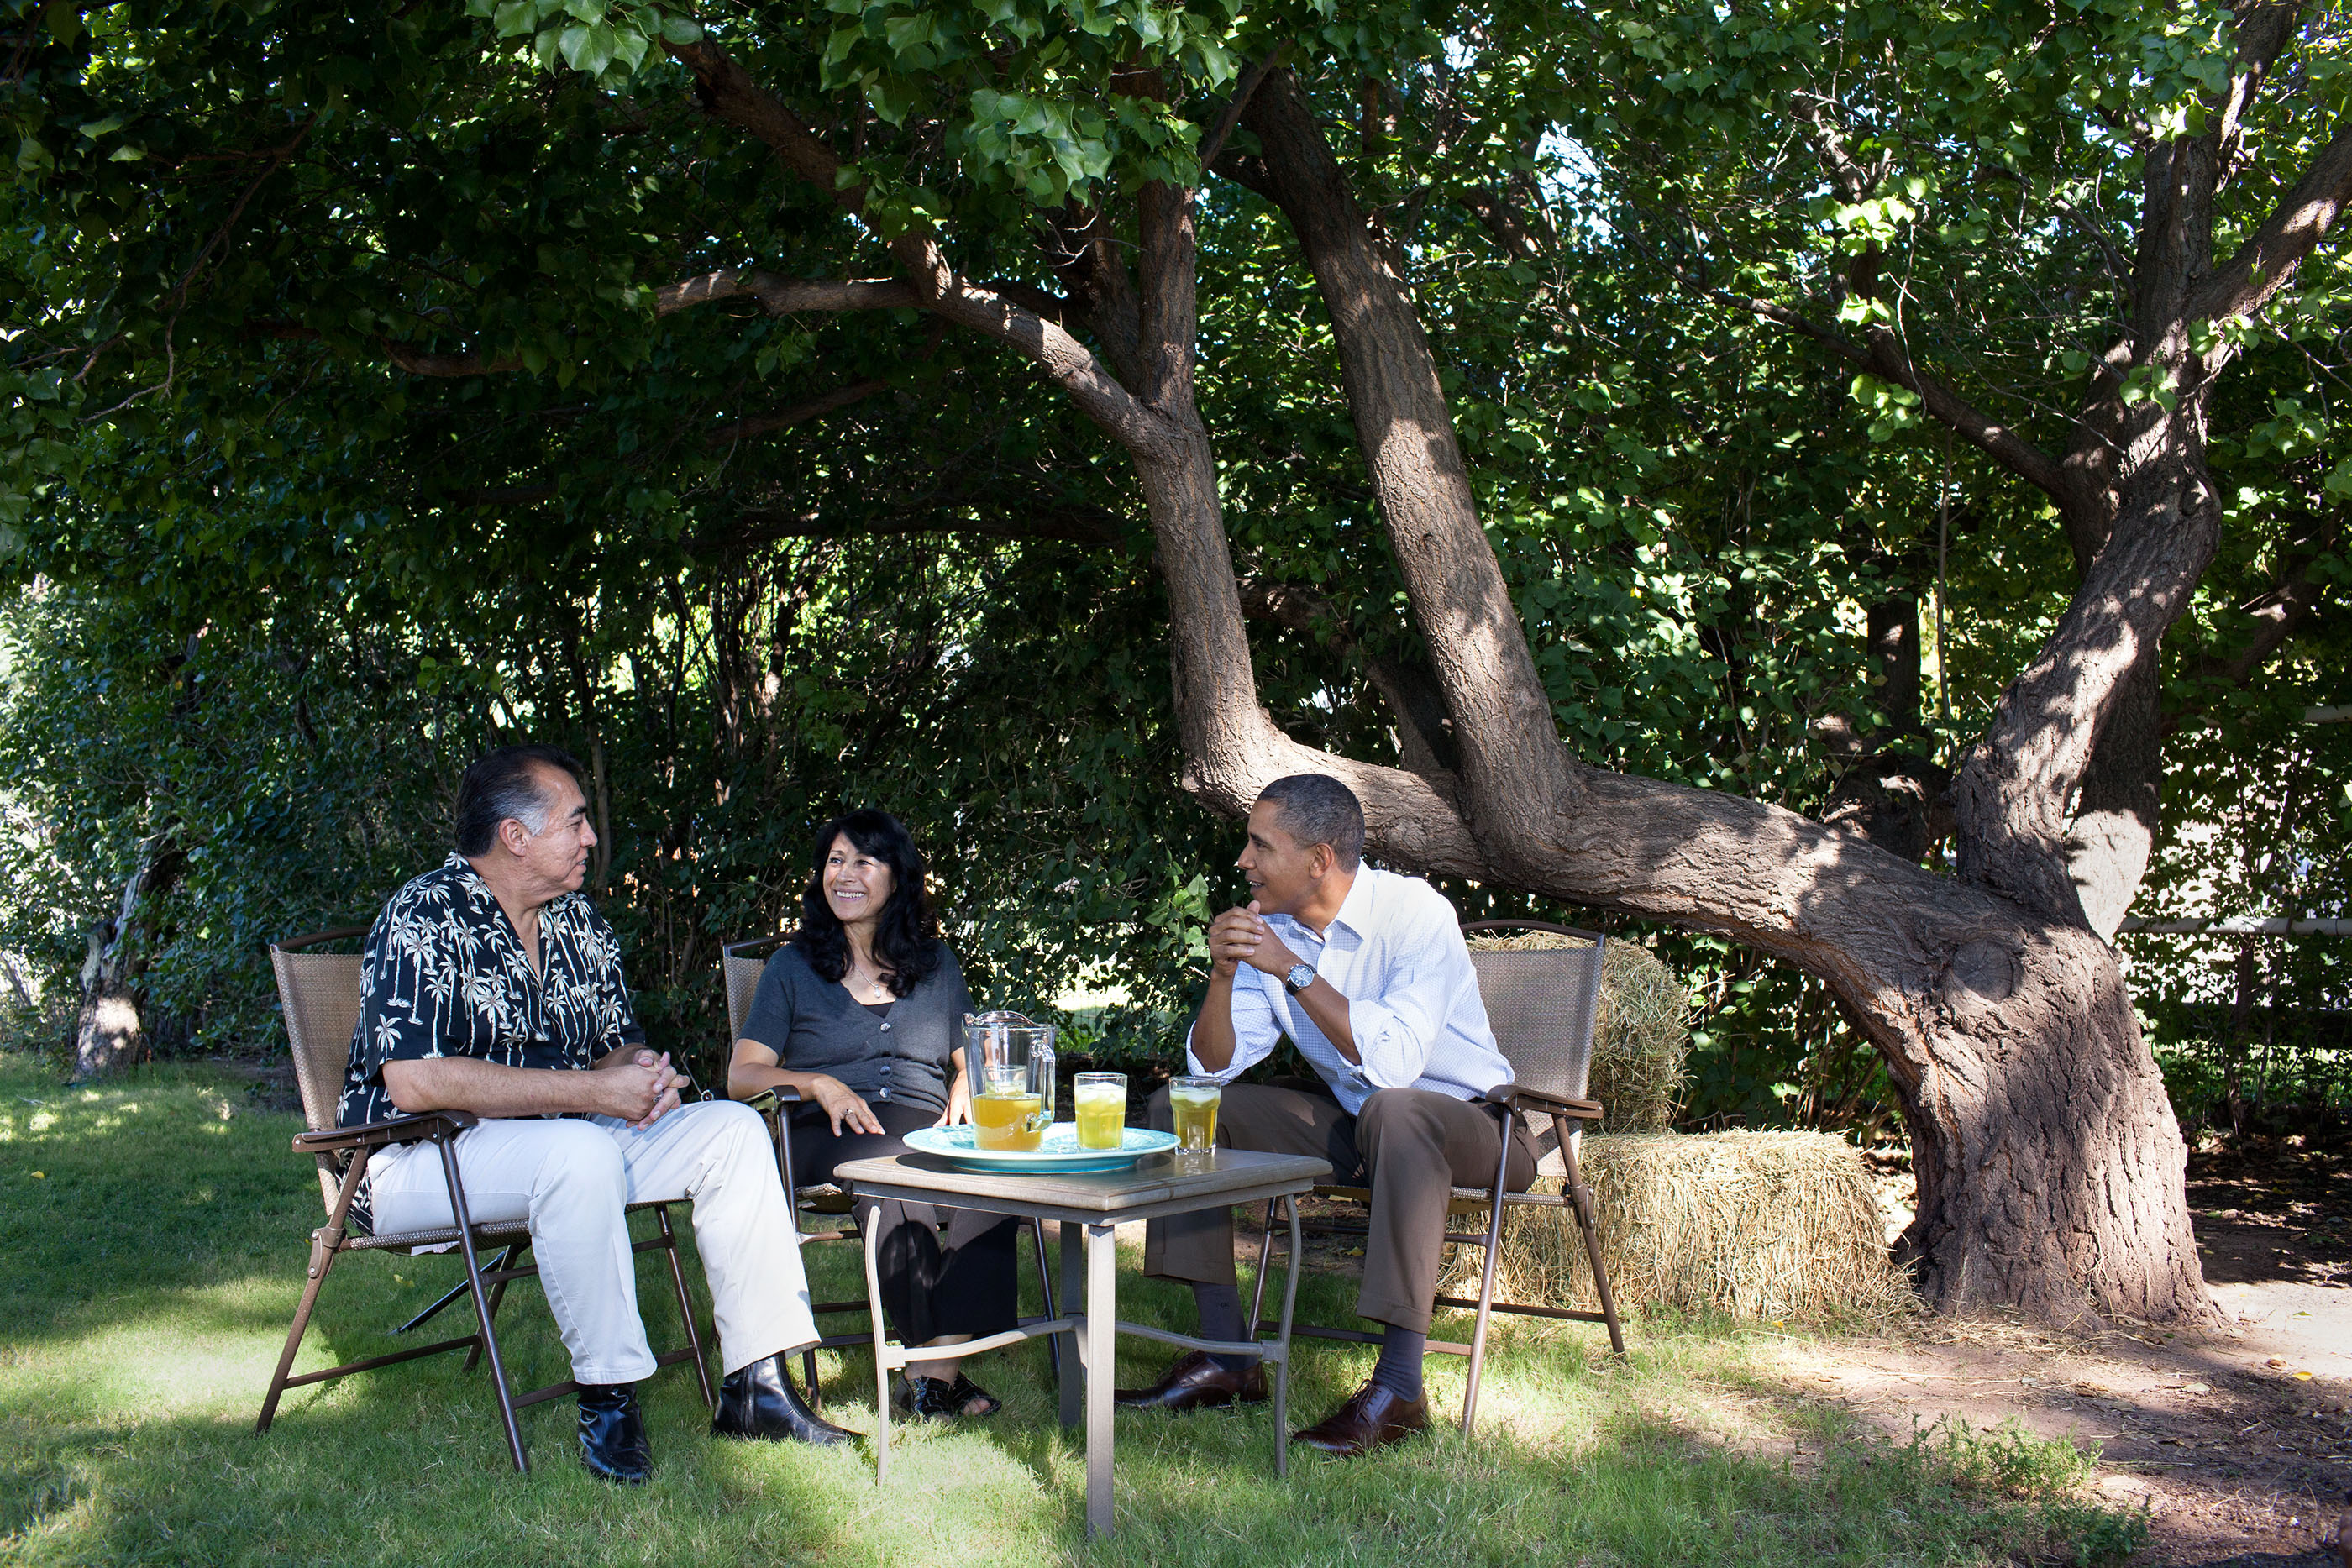 New Mexico, Sept. 28, 2010. Having lemonade with Andy and Etta Cavalier at their home in Albuquerque. (Official White House Photo by Pete Souza)